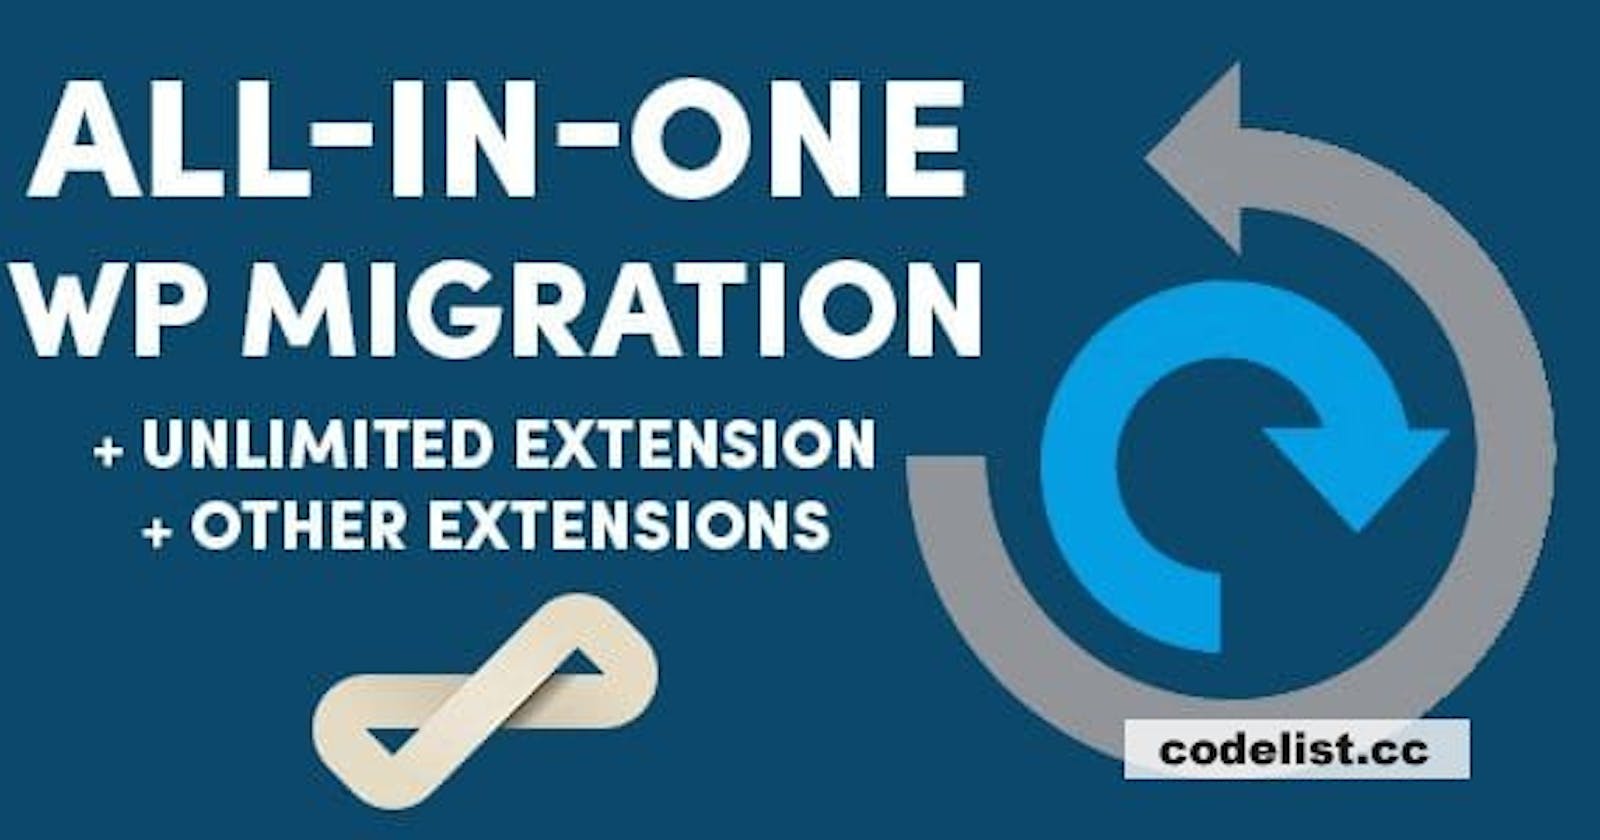 All-in-One WP Migration Unlimited Extension v2.49